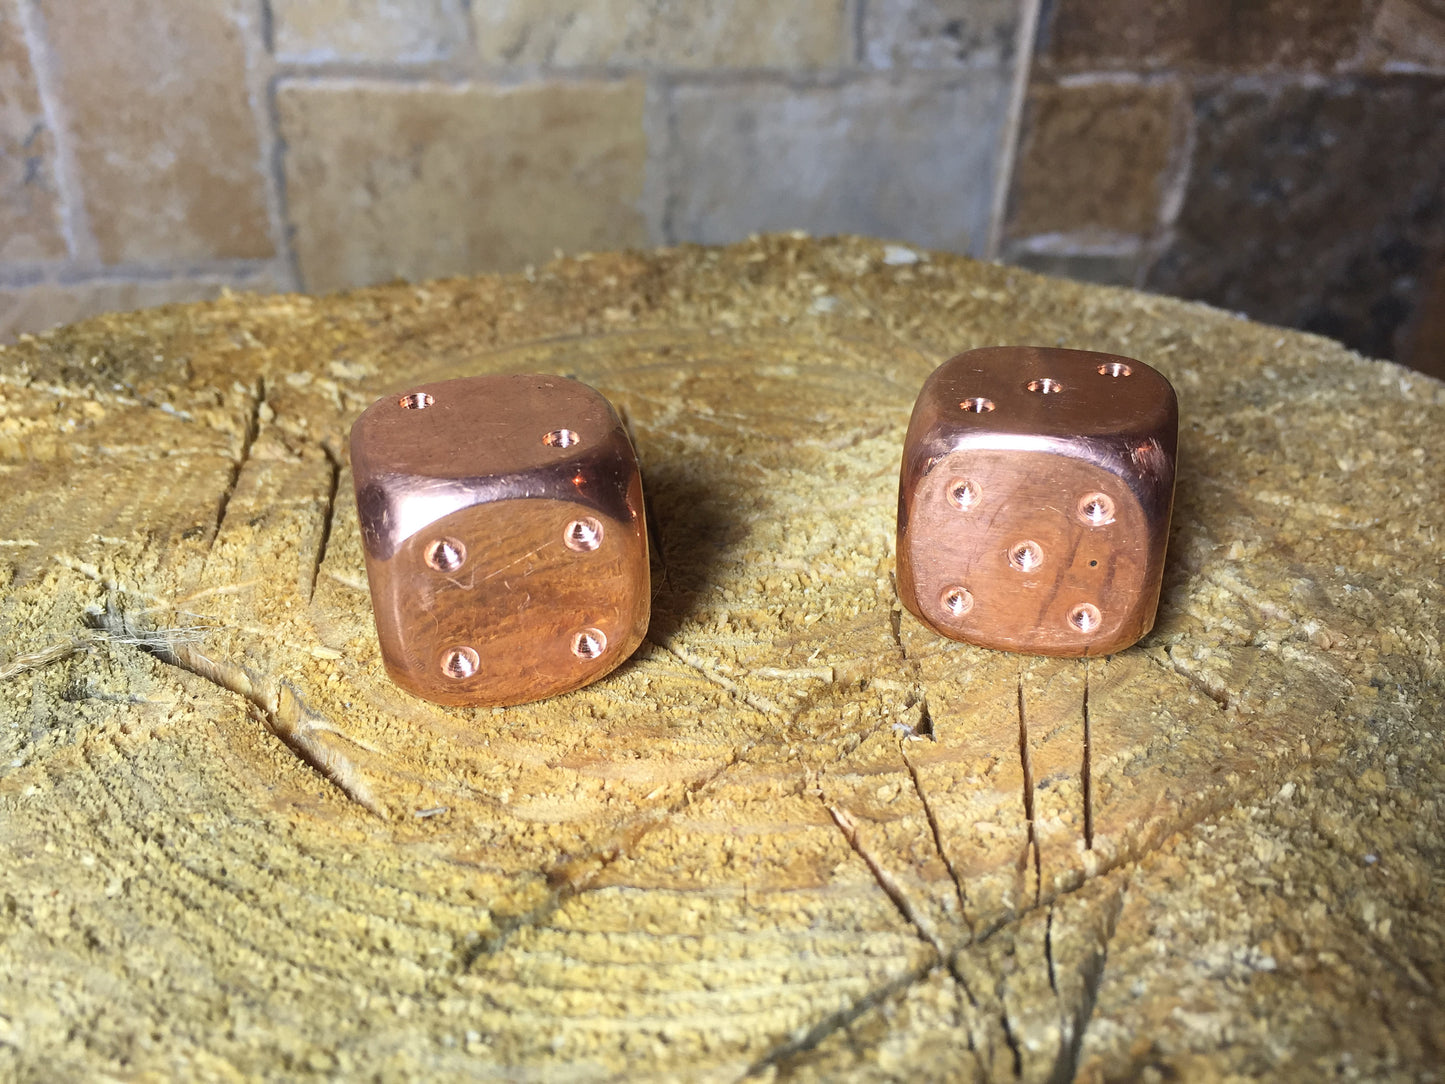 Copper dices, copper anniversary gifts, copper gifts, hand forged dice, 7 year gifts, blacksmith dice, dice set, tabletop game, board game